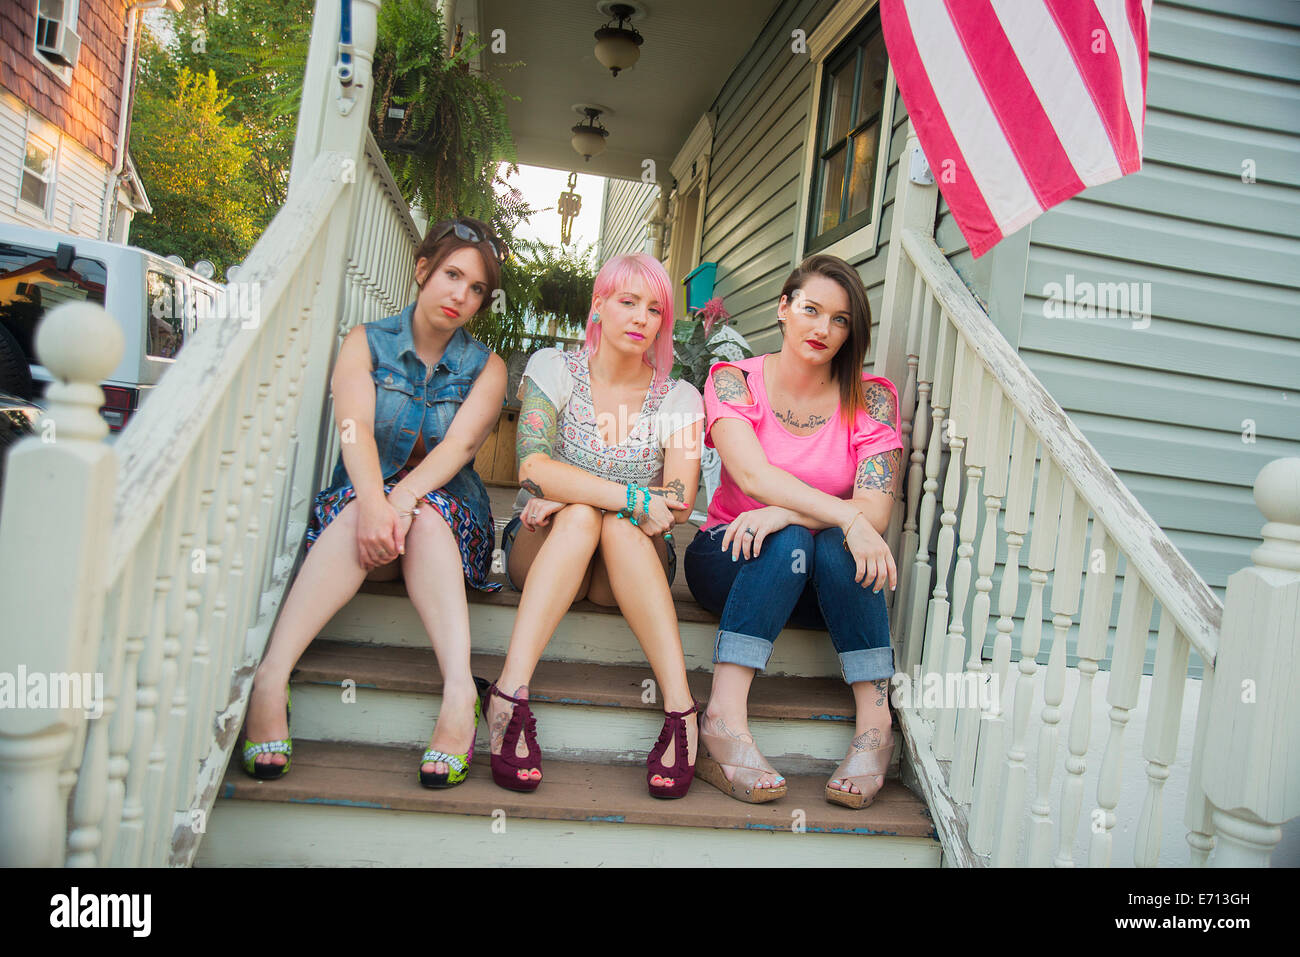 Portrait of young female friends sitting on porch steps Stock Photo